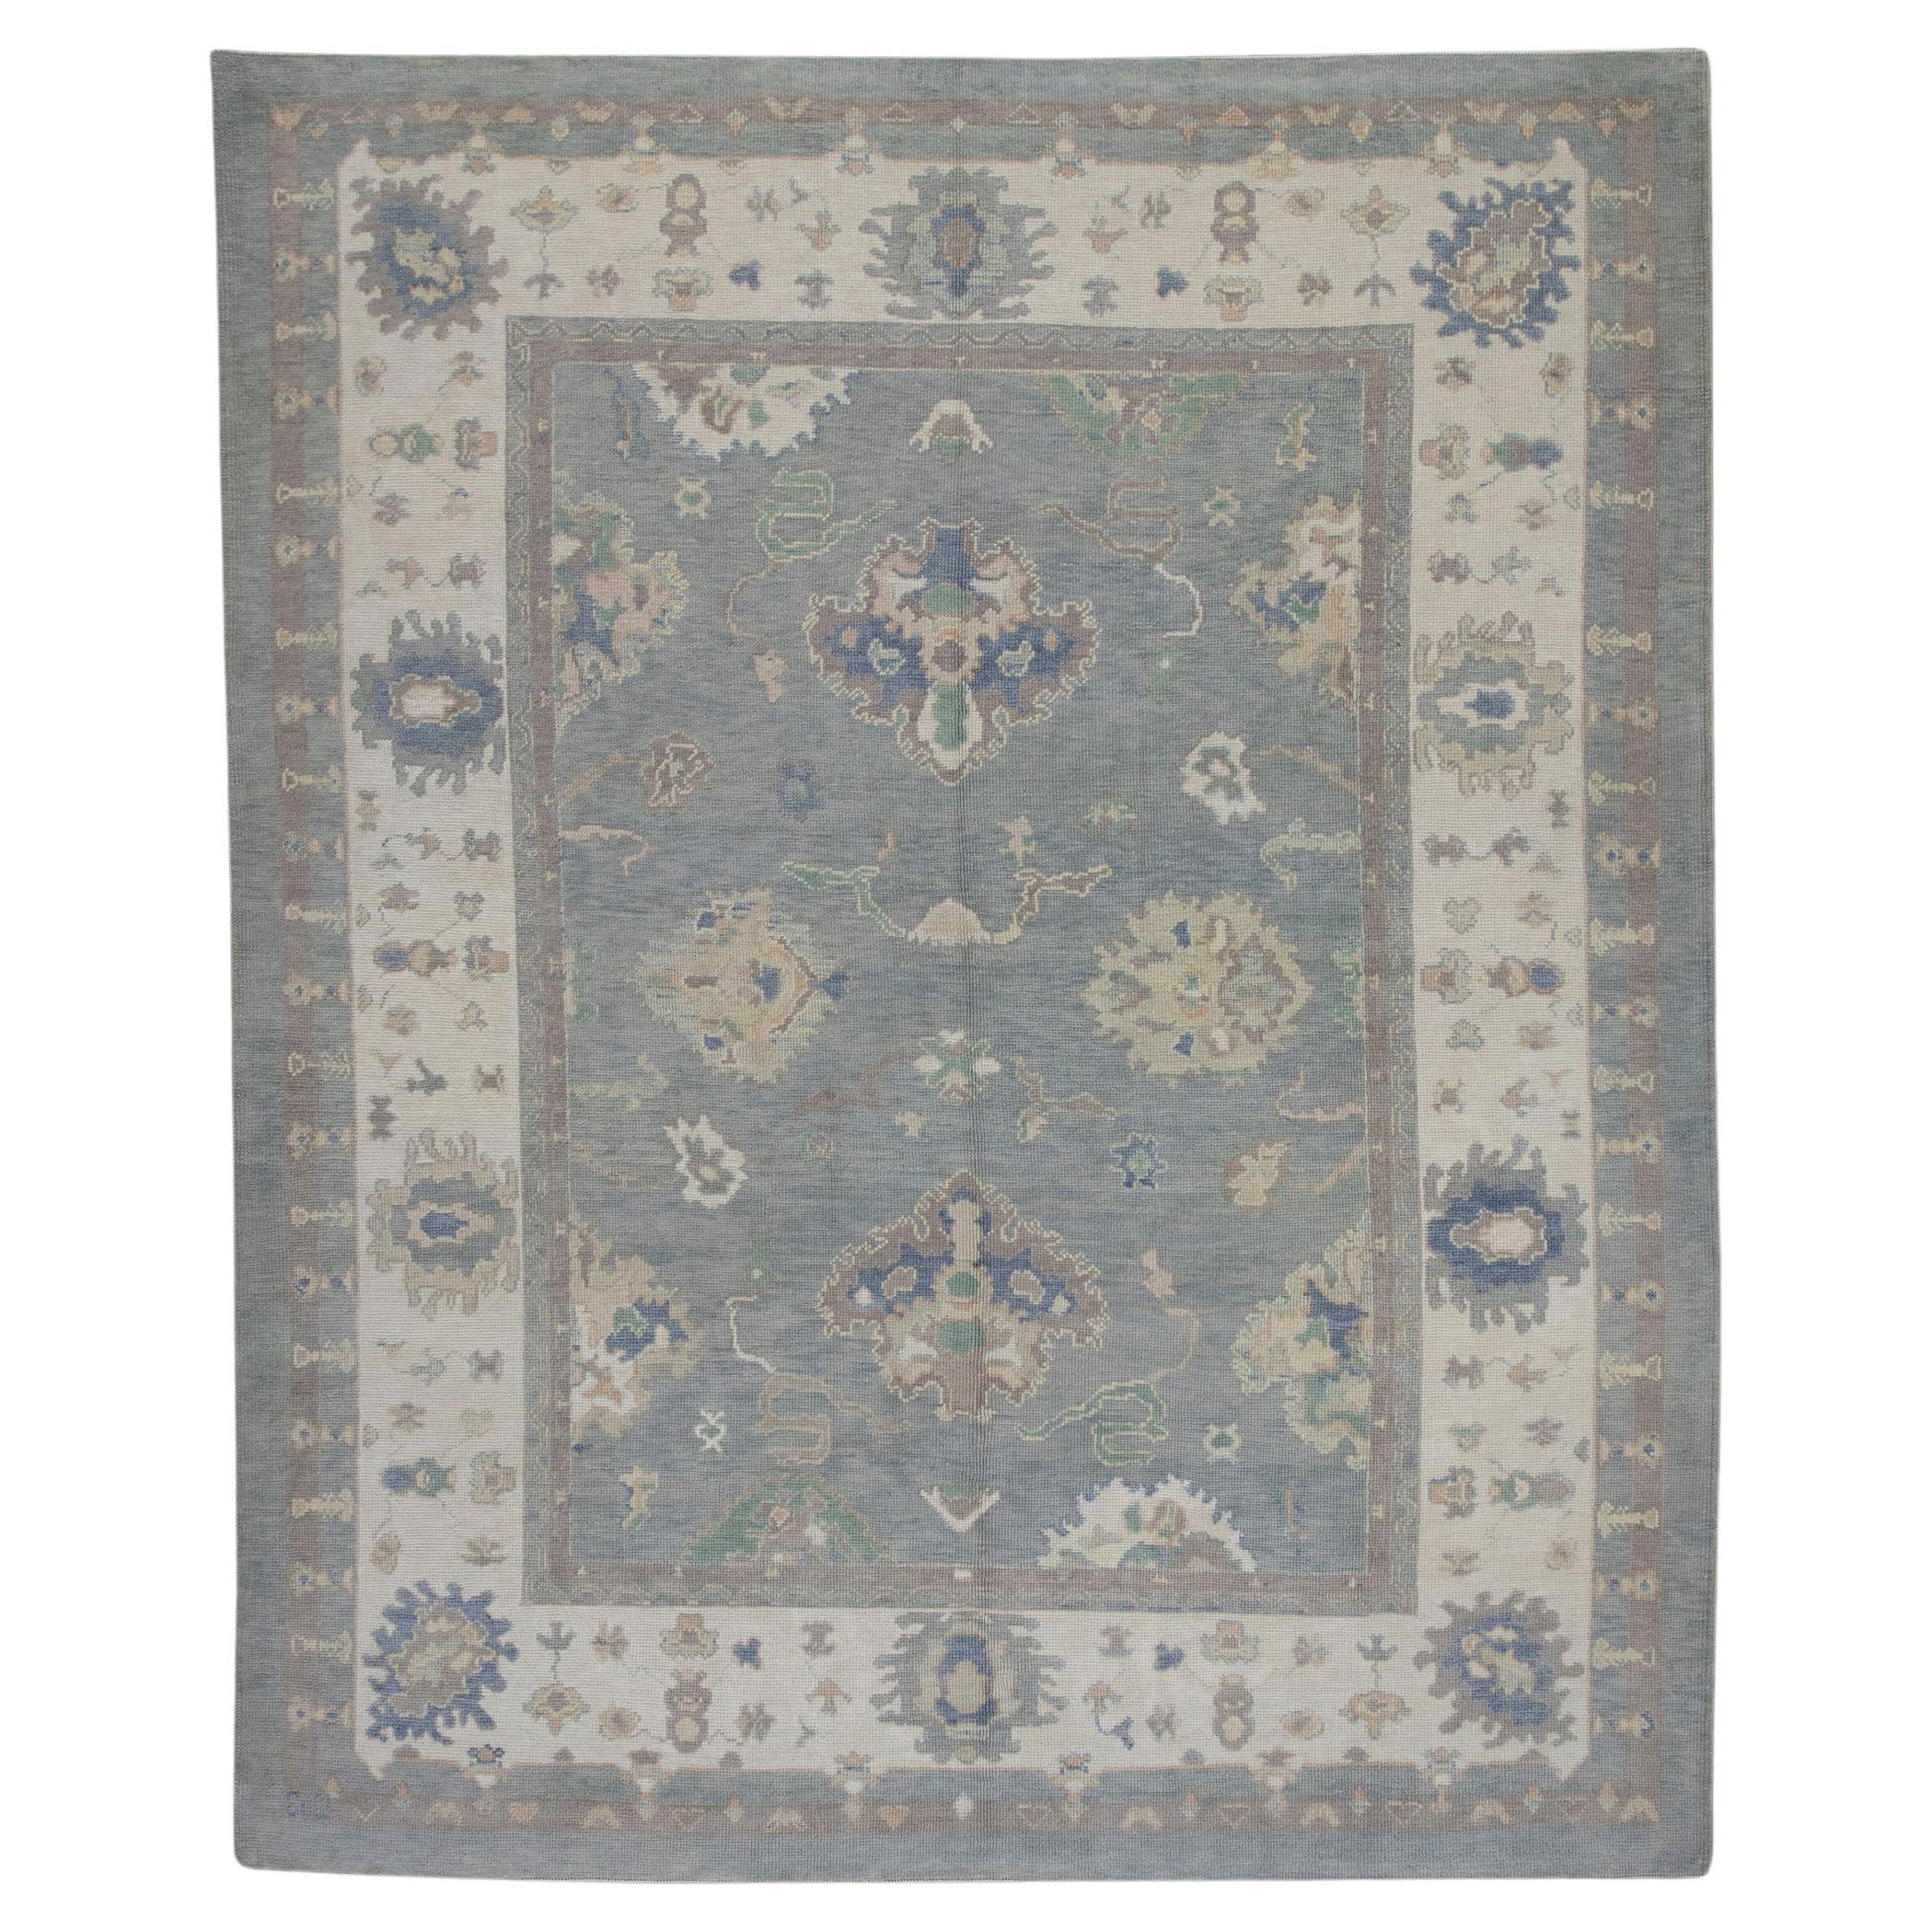 Blue Colorful Floral Pattern Handwoven Wool Turkish Oushak Rug 8'3" x 9'10"